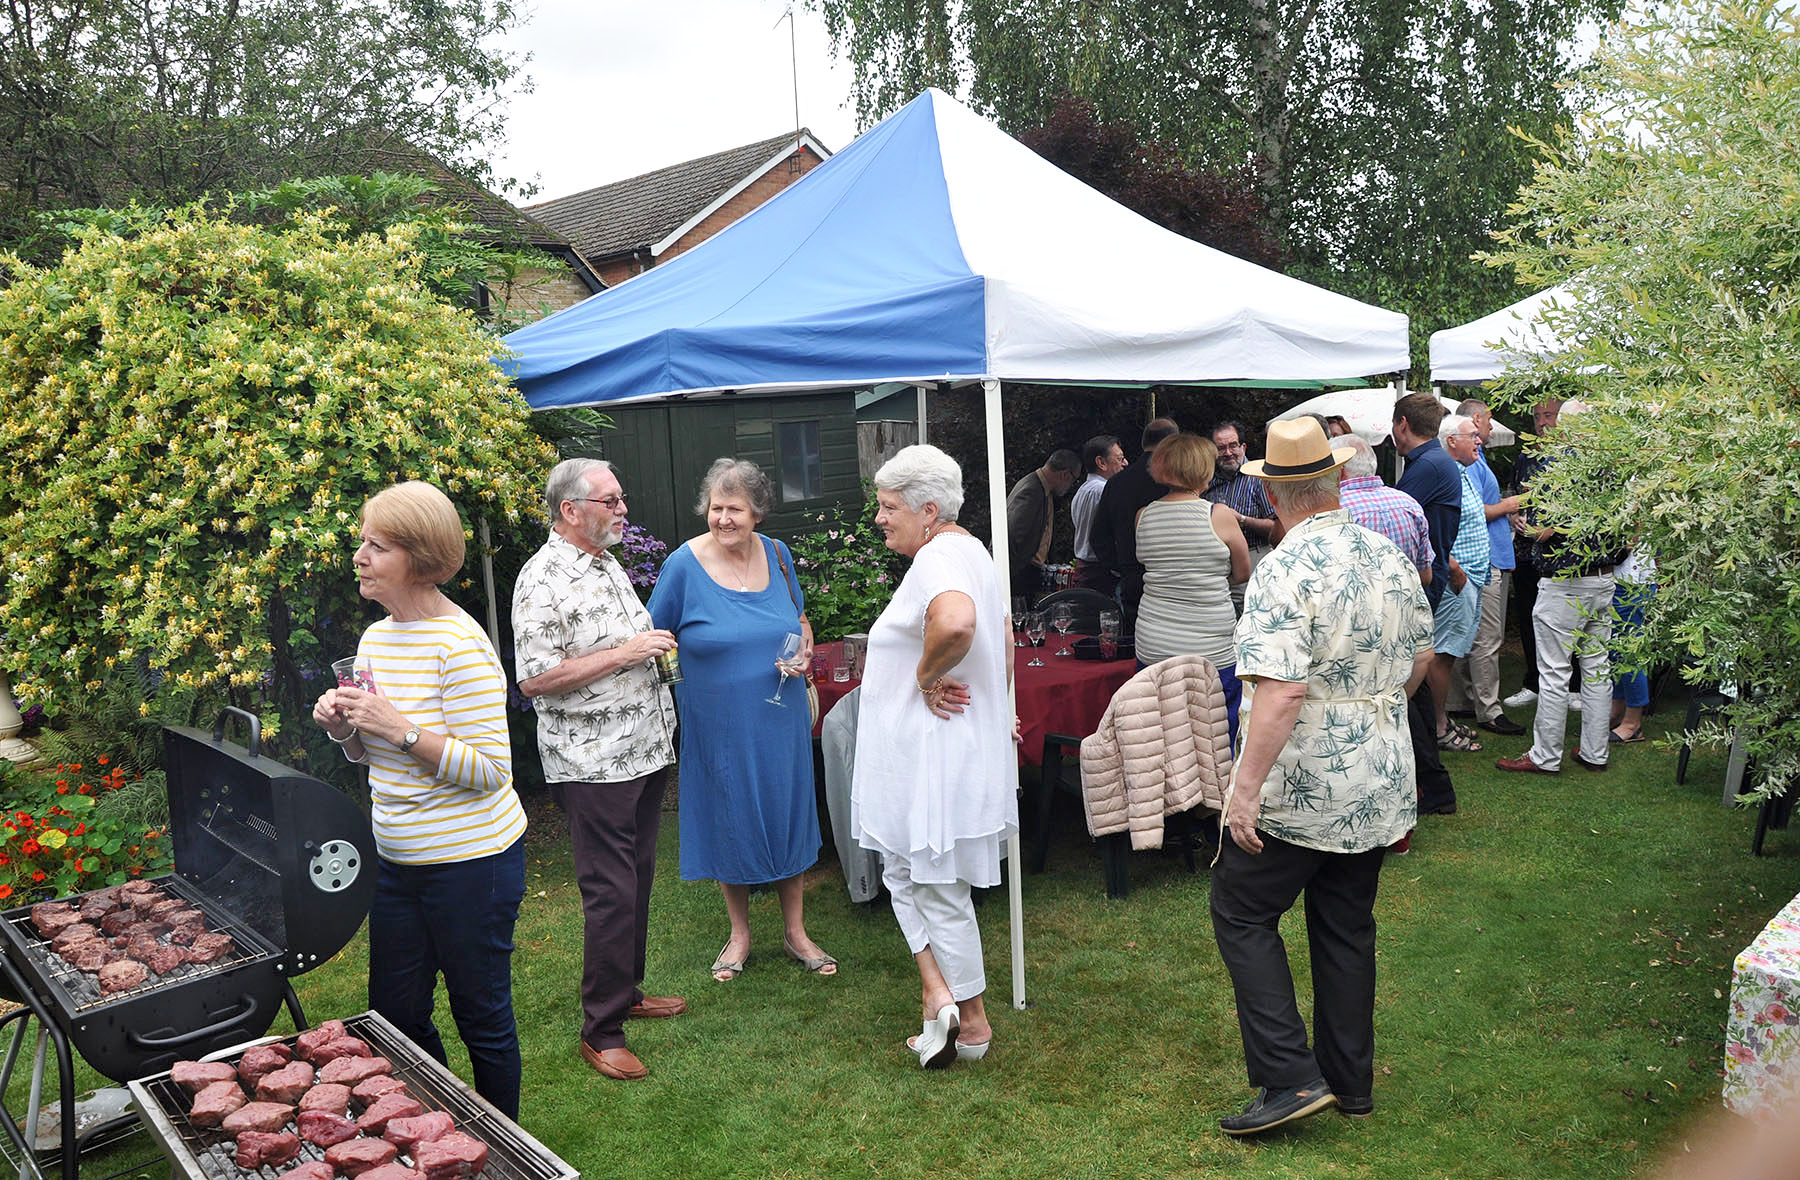 The Fourth Annual District Garden Party